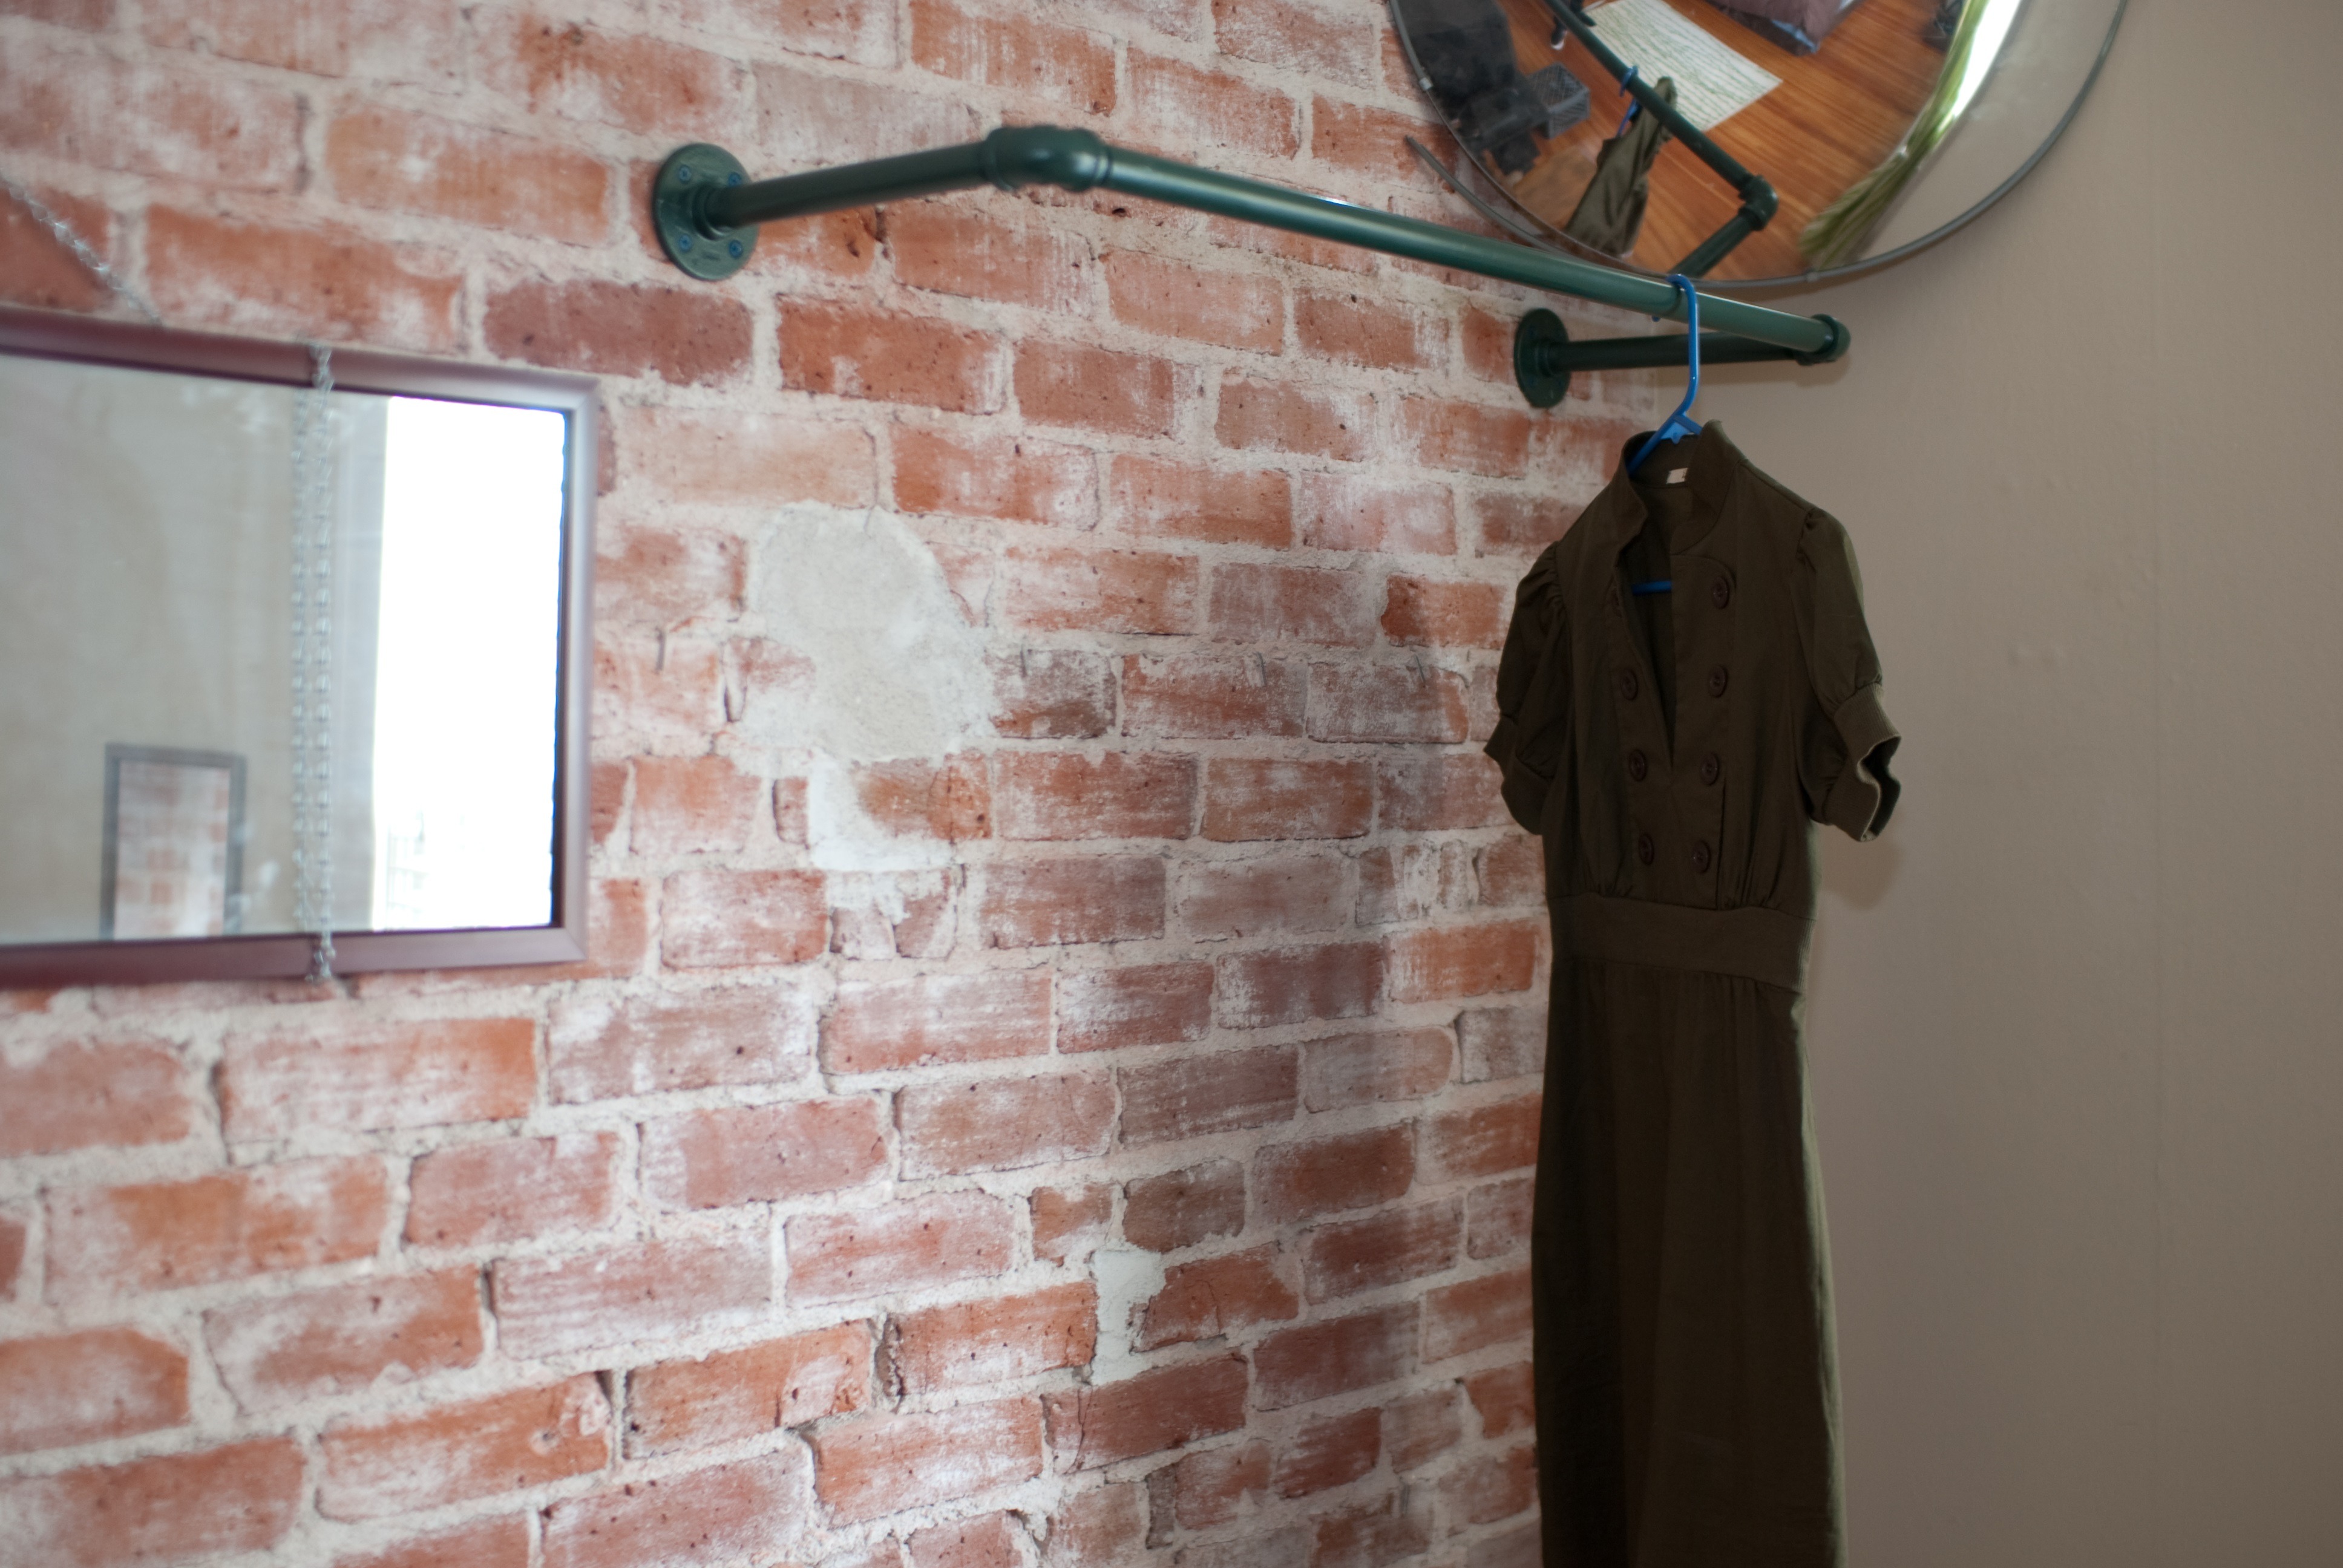 Make a Free-Standing Clothing Rack from Galvanized Pipe - Earth911.com